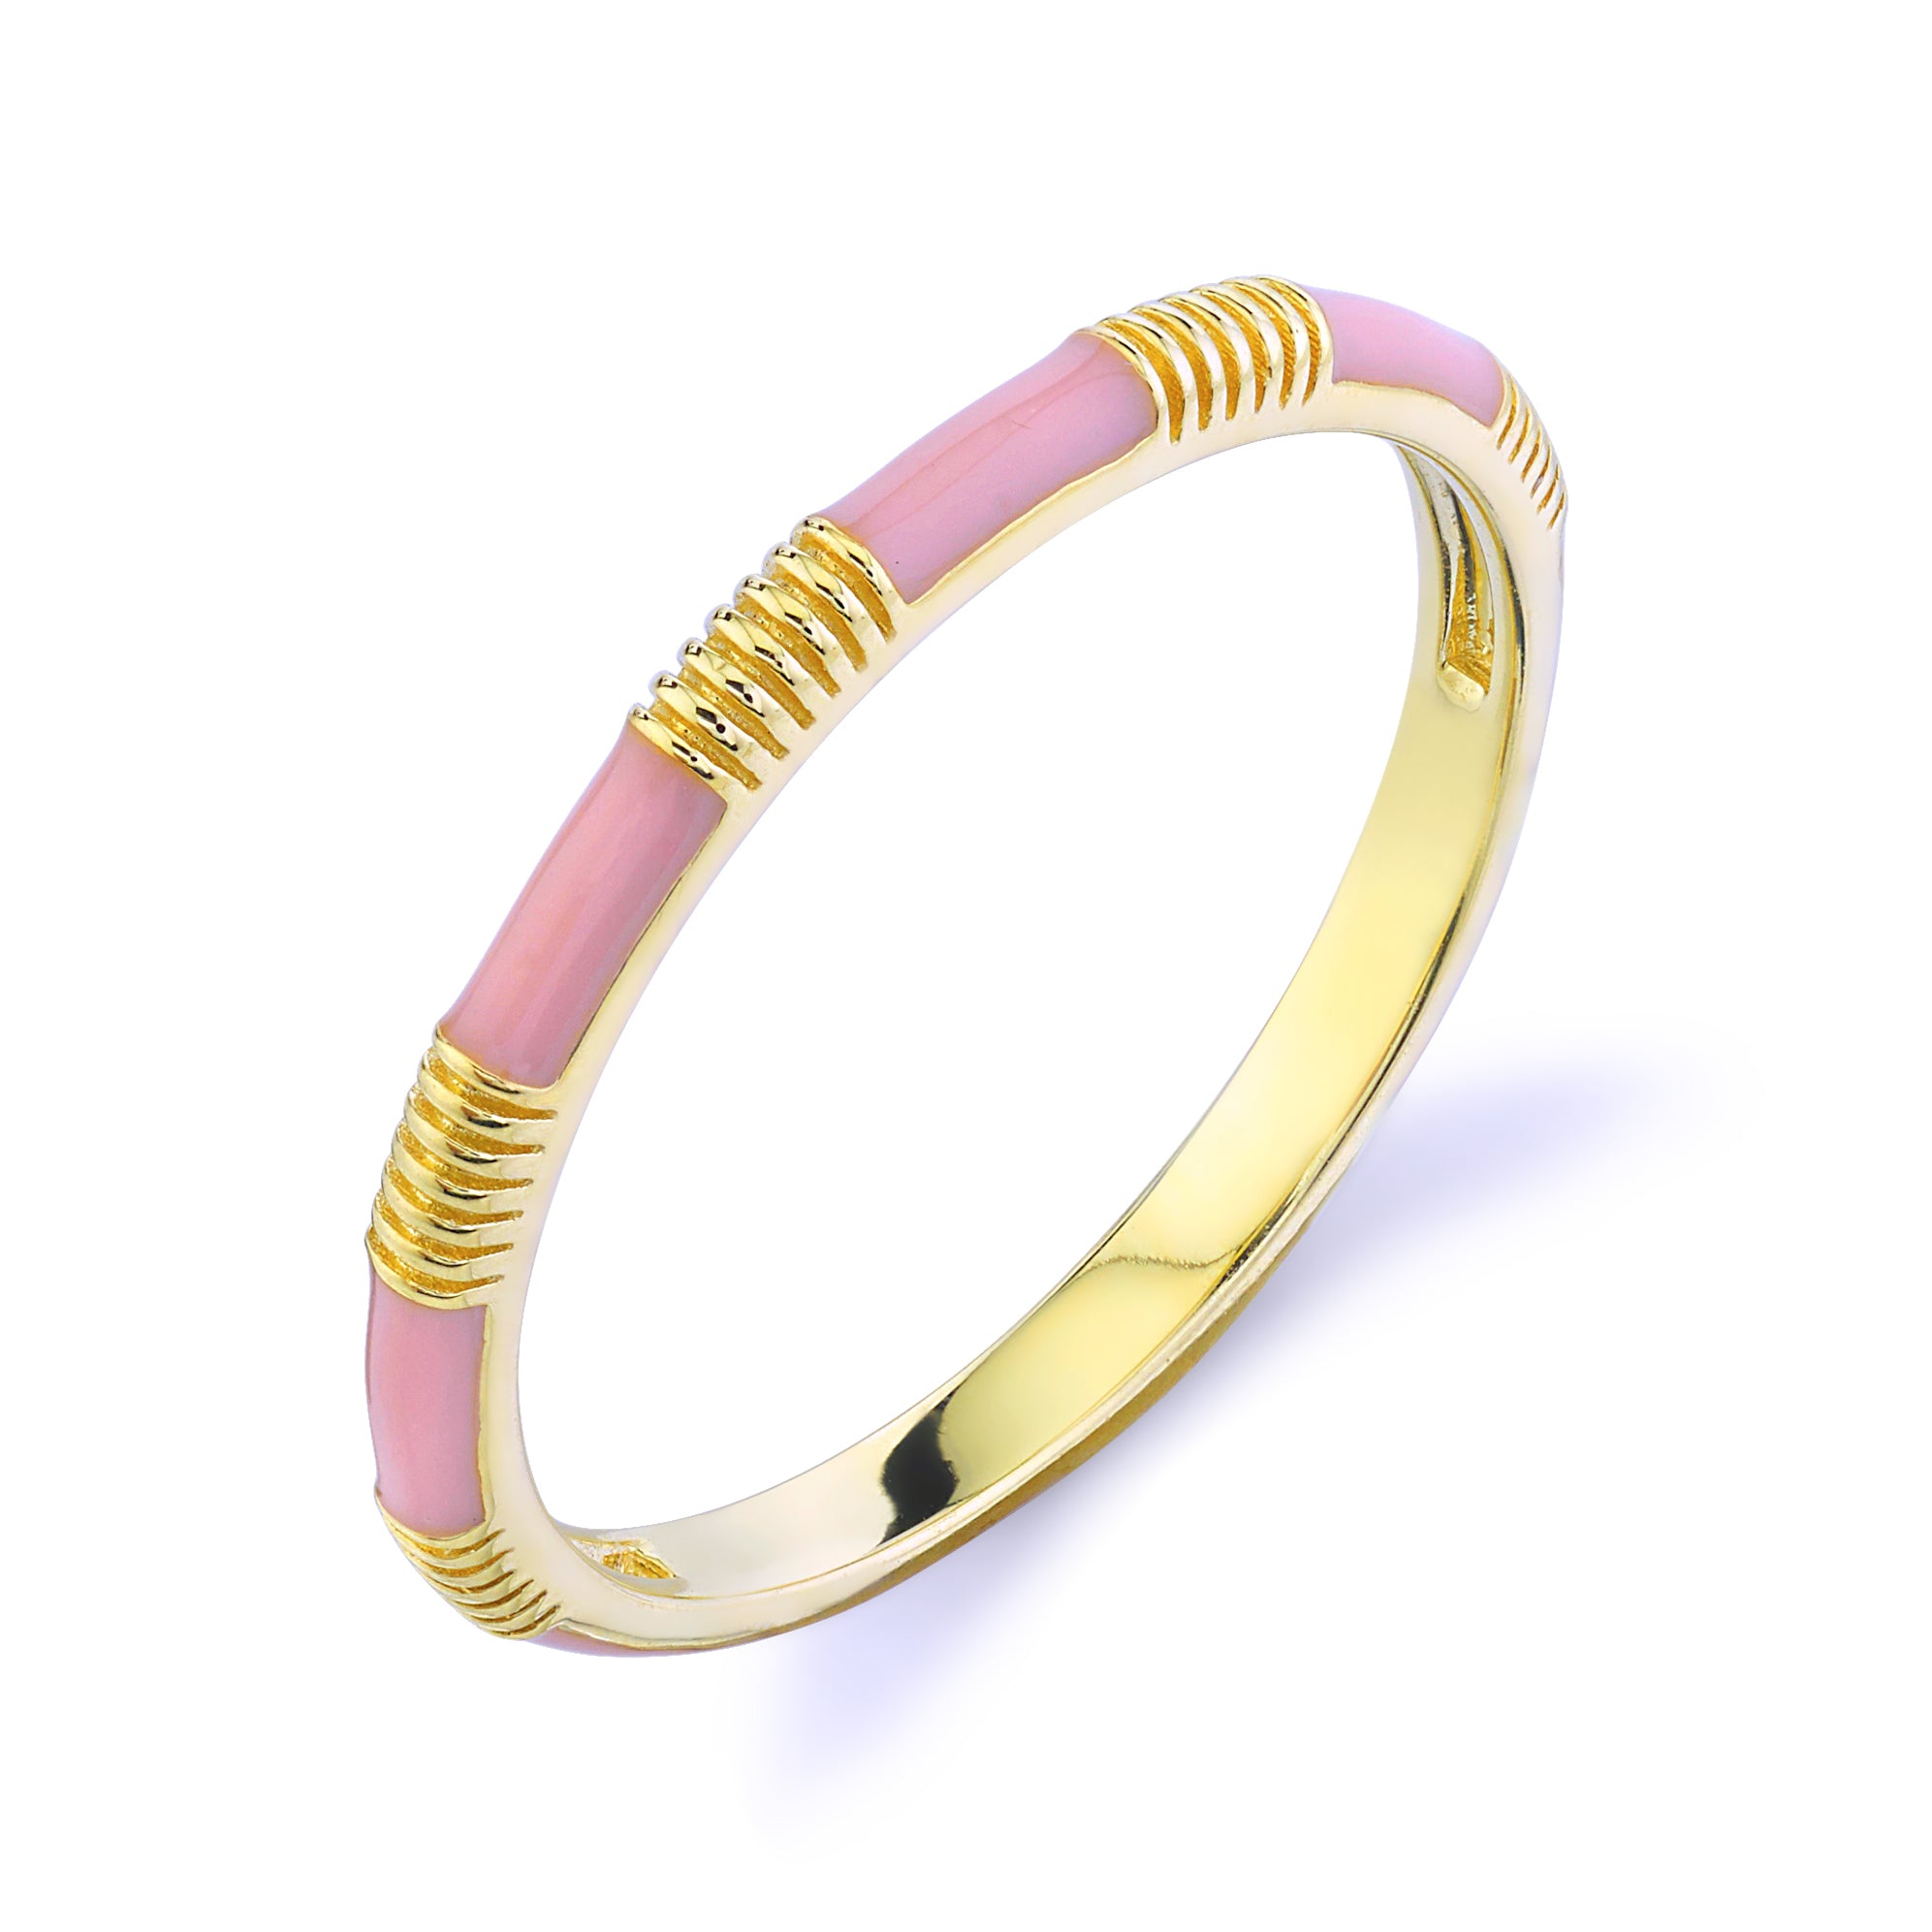 Pink Enamel Band with Strie Detail